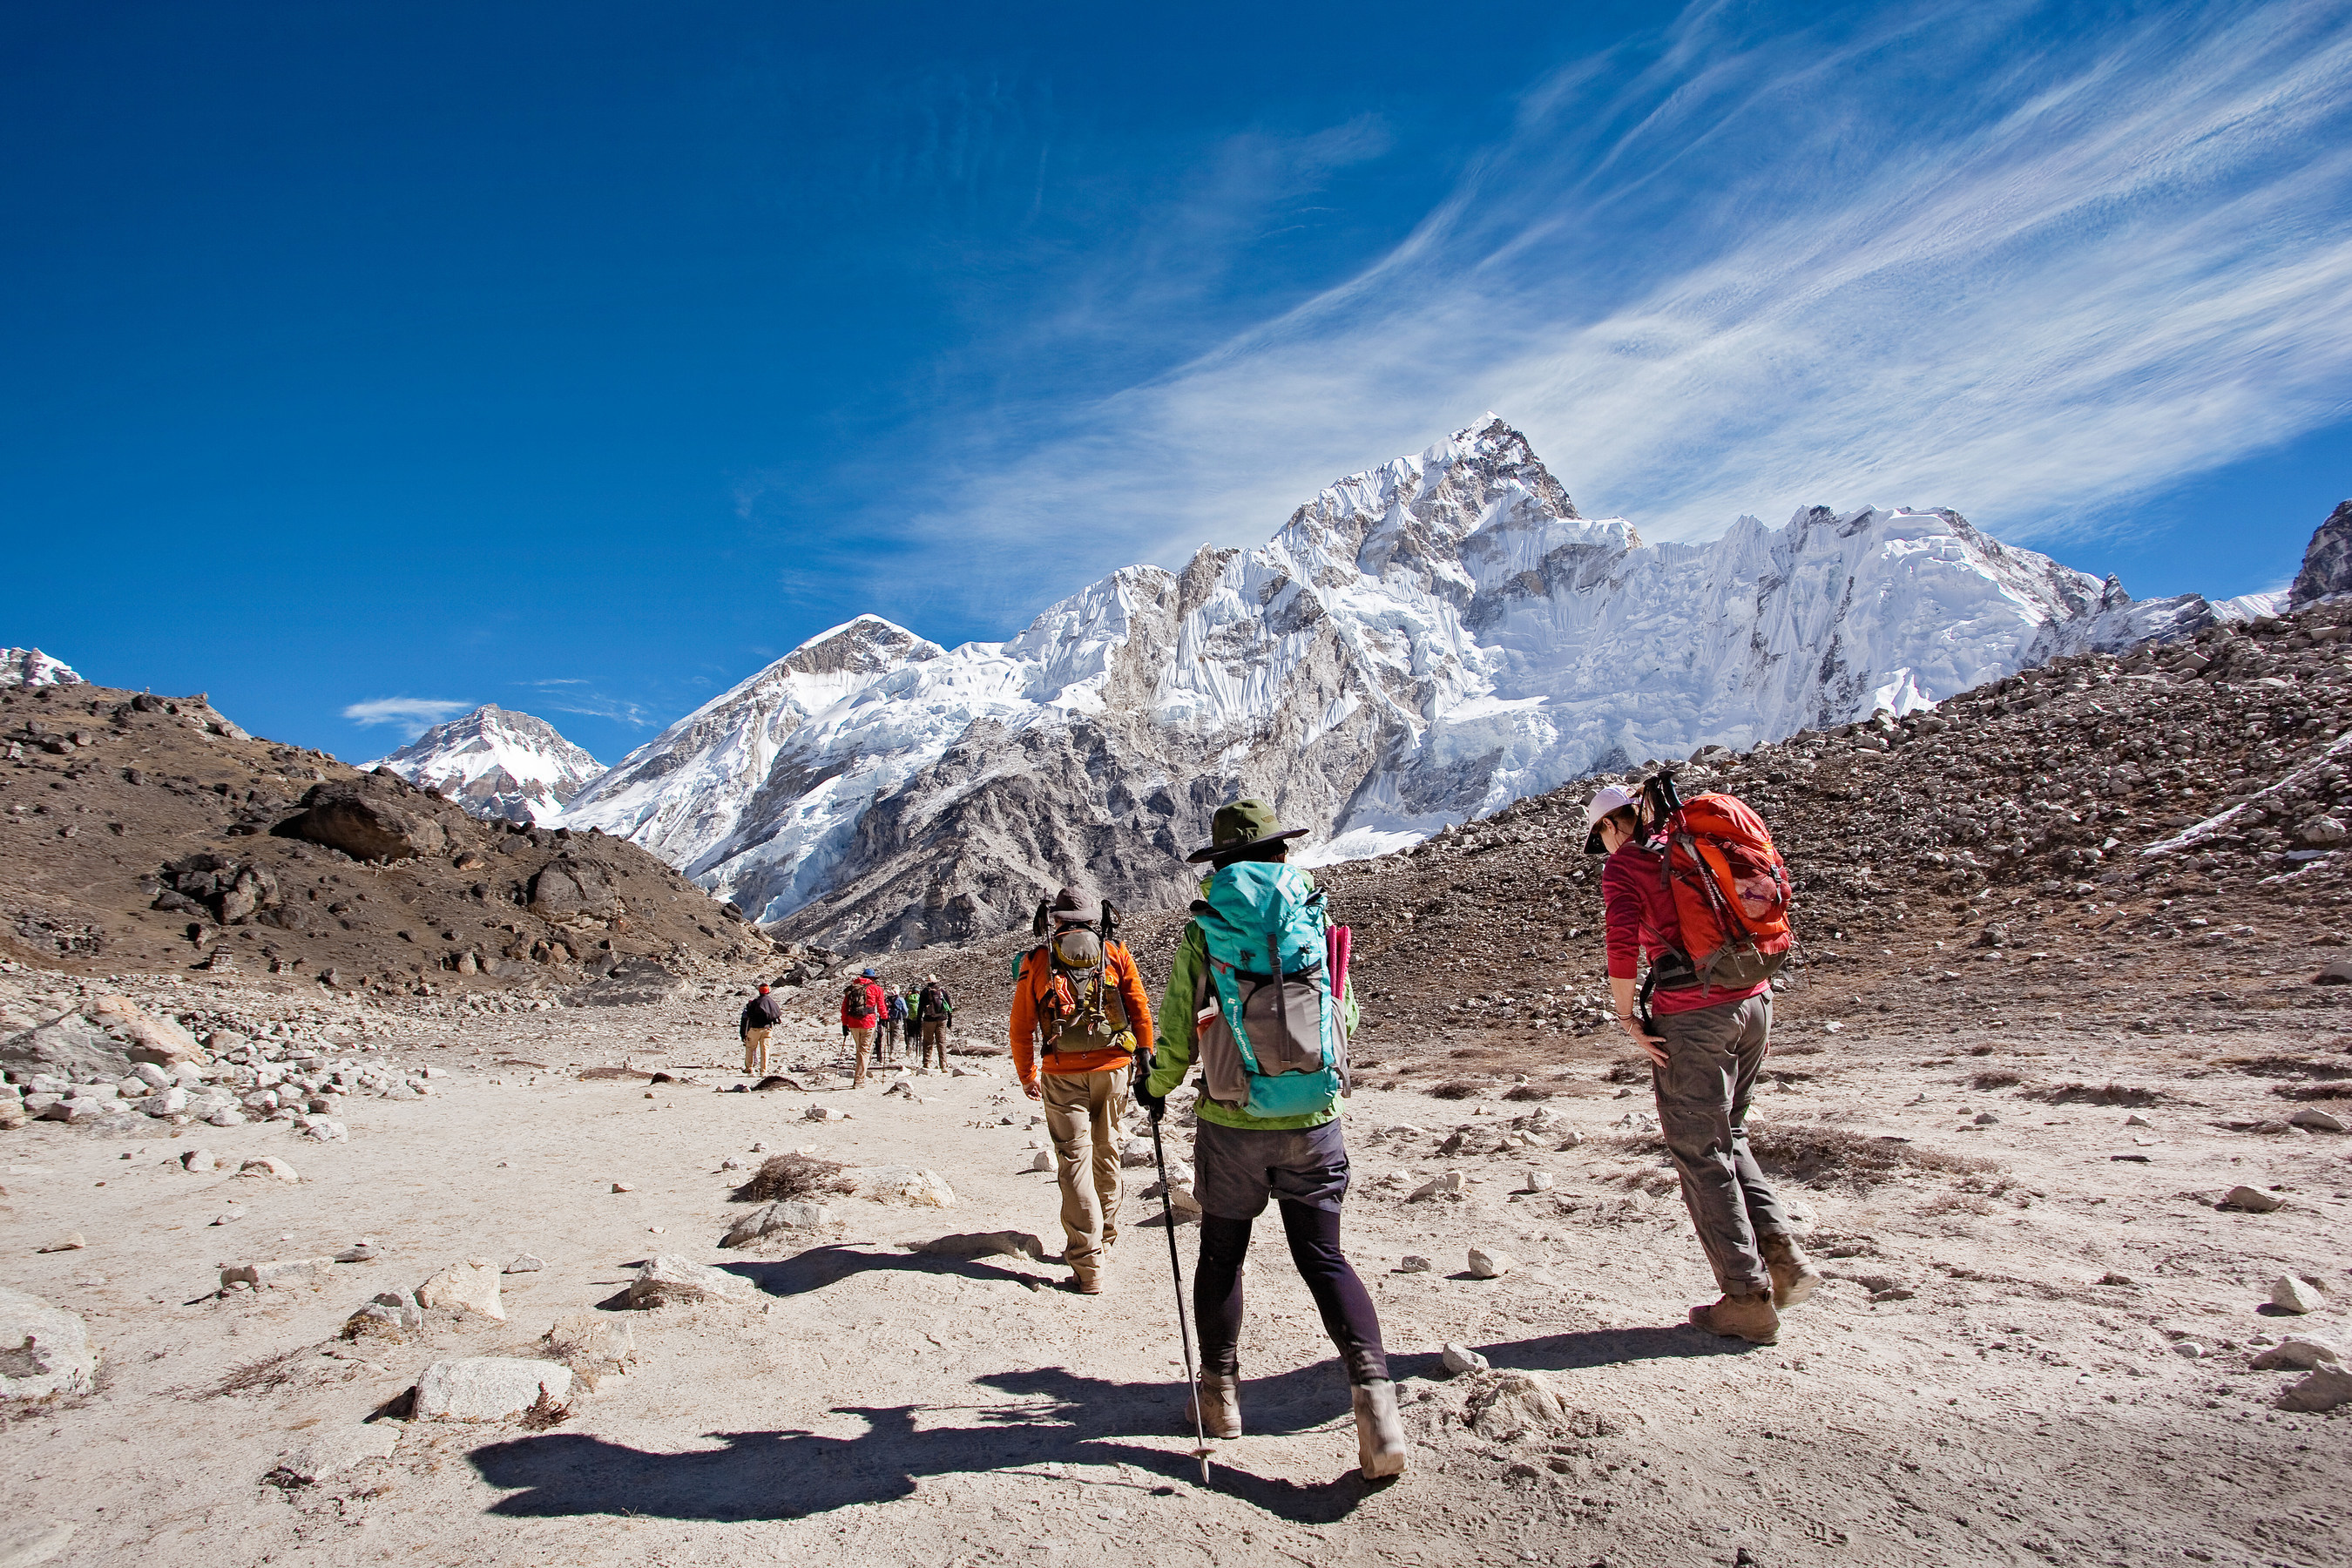 REI Adventures: At the gateway to Everest Base Camp, Nuptse, Lhotse and a host of the world's tallest peaks welcome you.